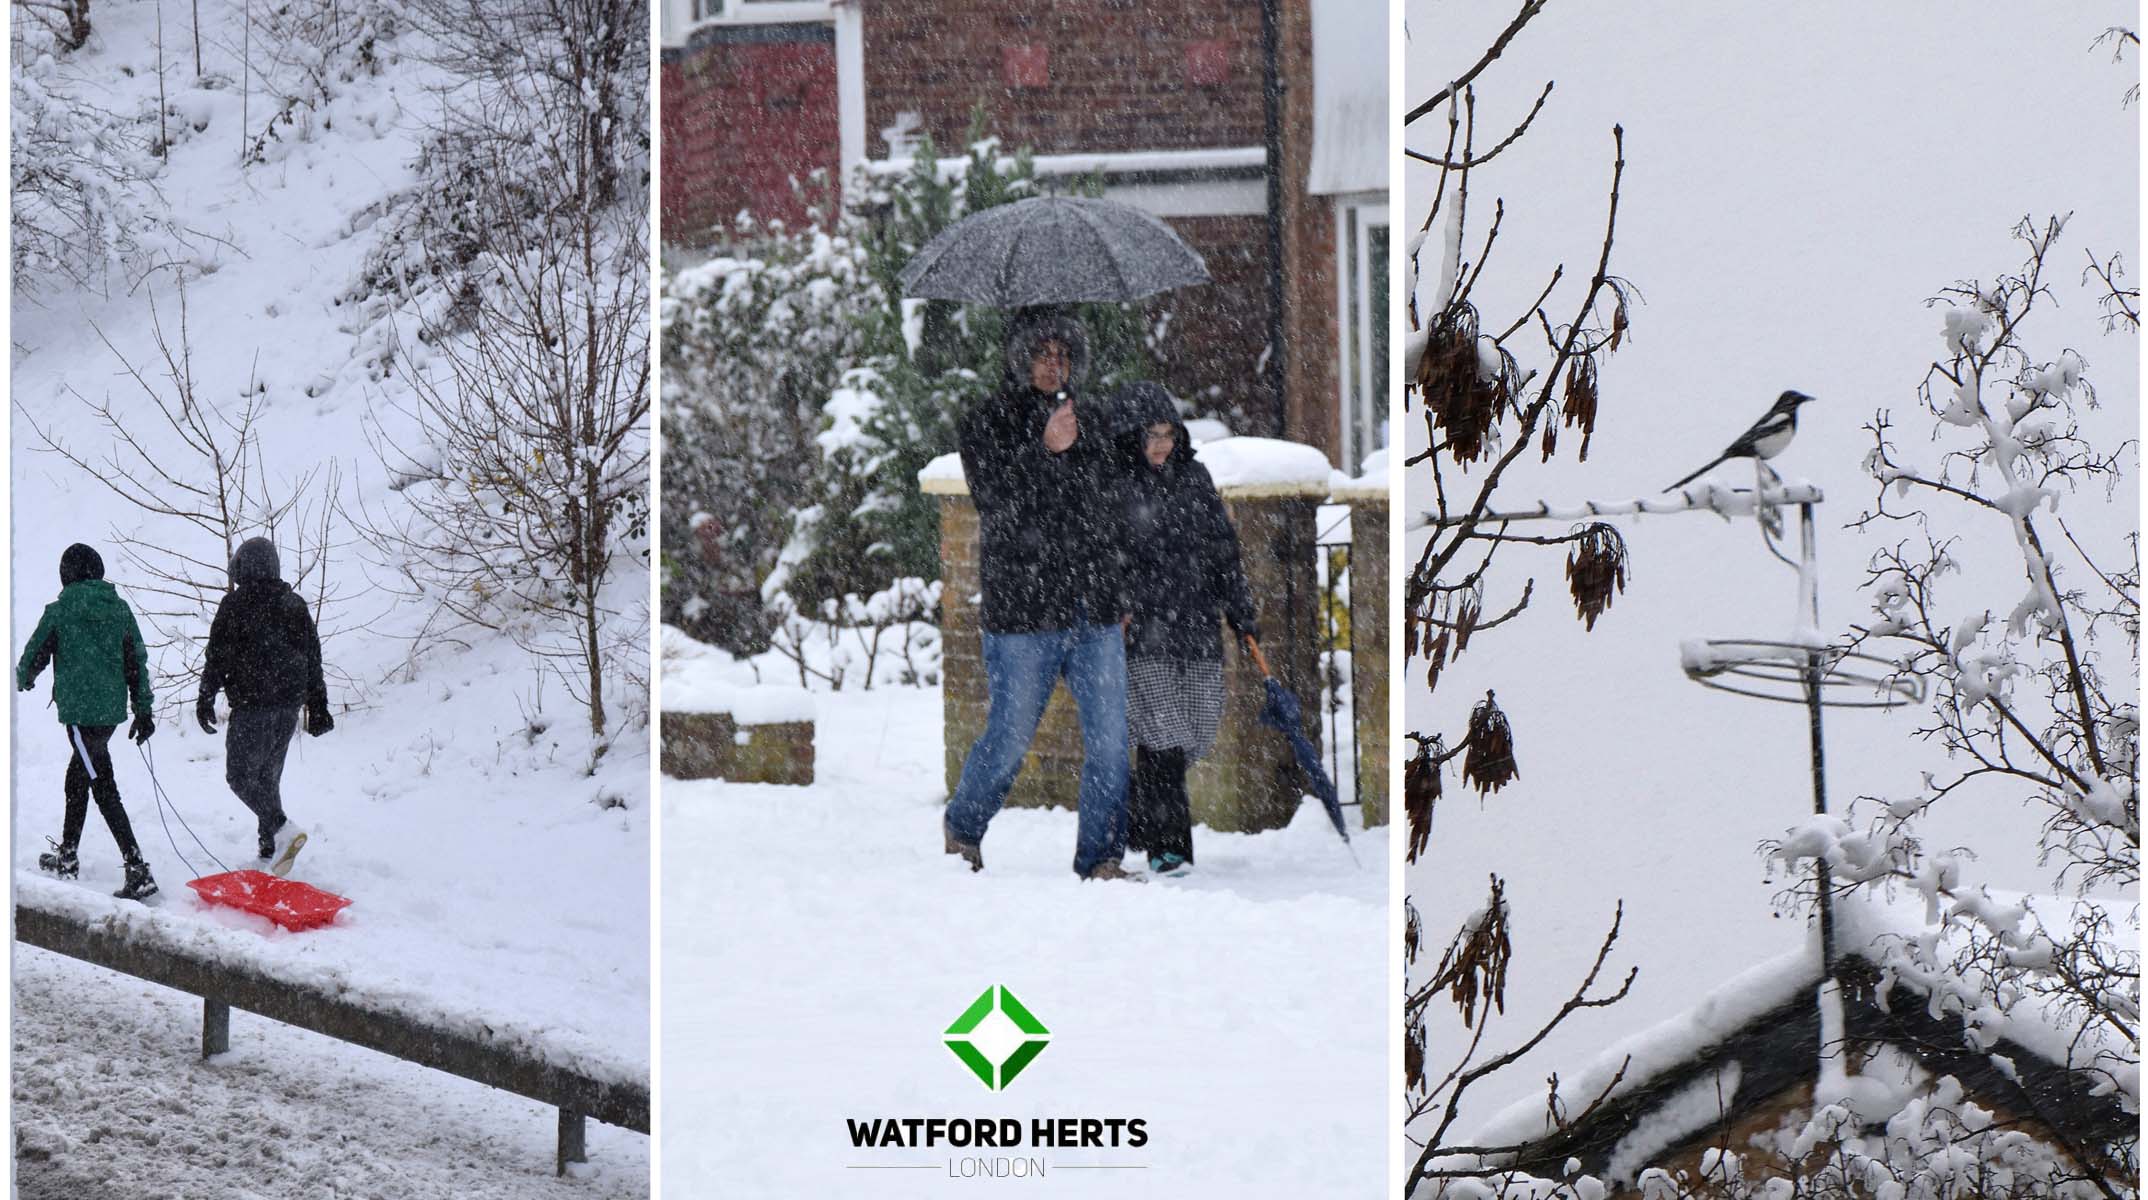 The Met Office has issued weather warnings for the South East, the North and parts of southern Scotland, with icy roads and drifting snow potentially causing dangerous conditions for travellers.